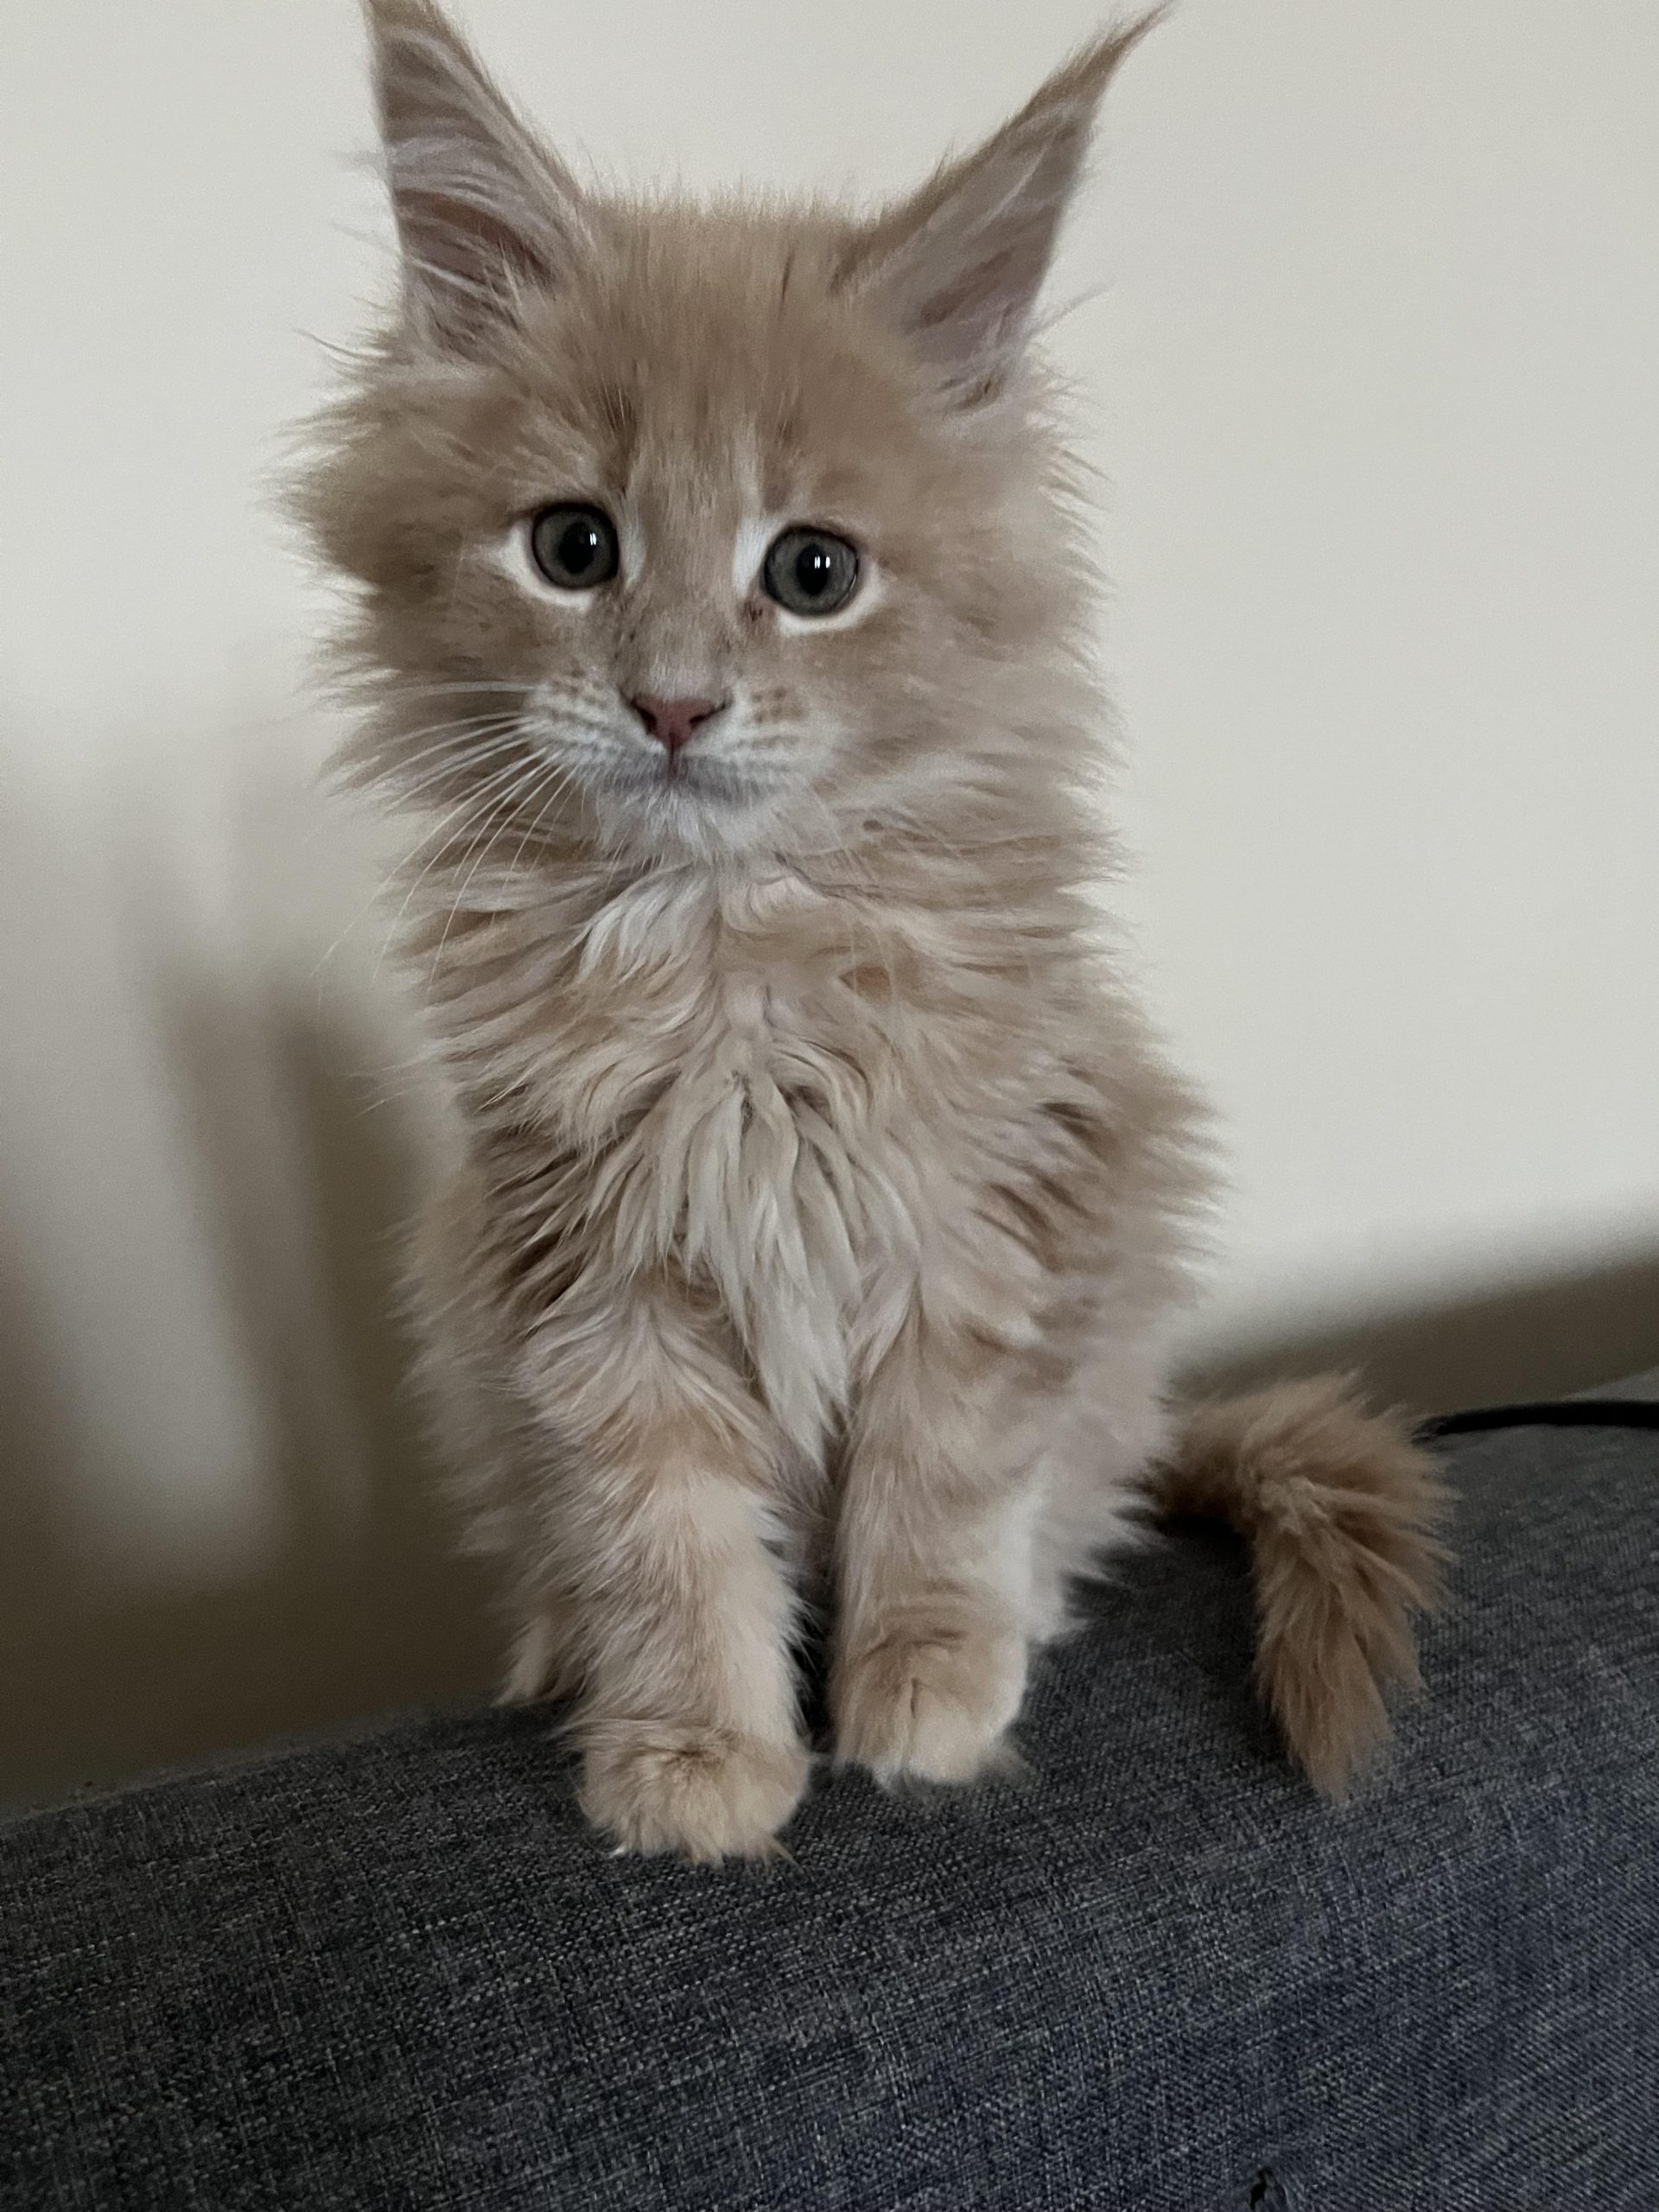 What Do Maine Coon Kittens Look Like